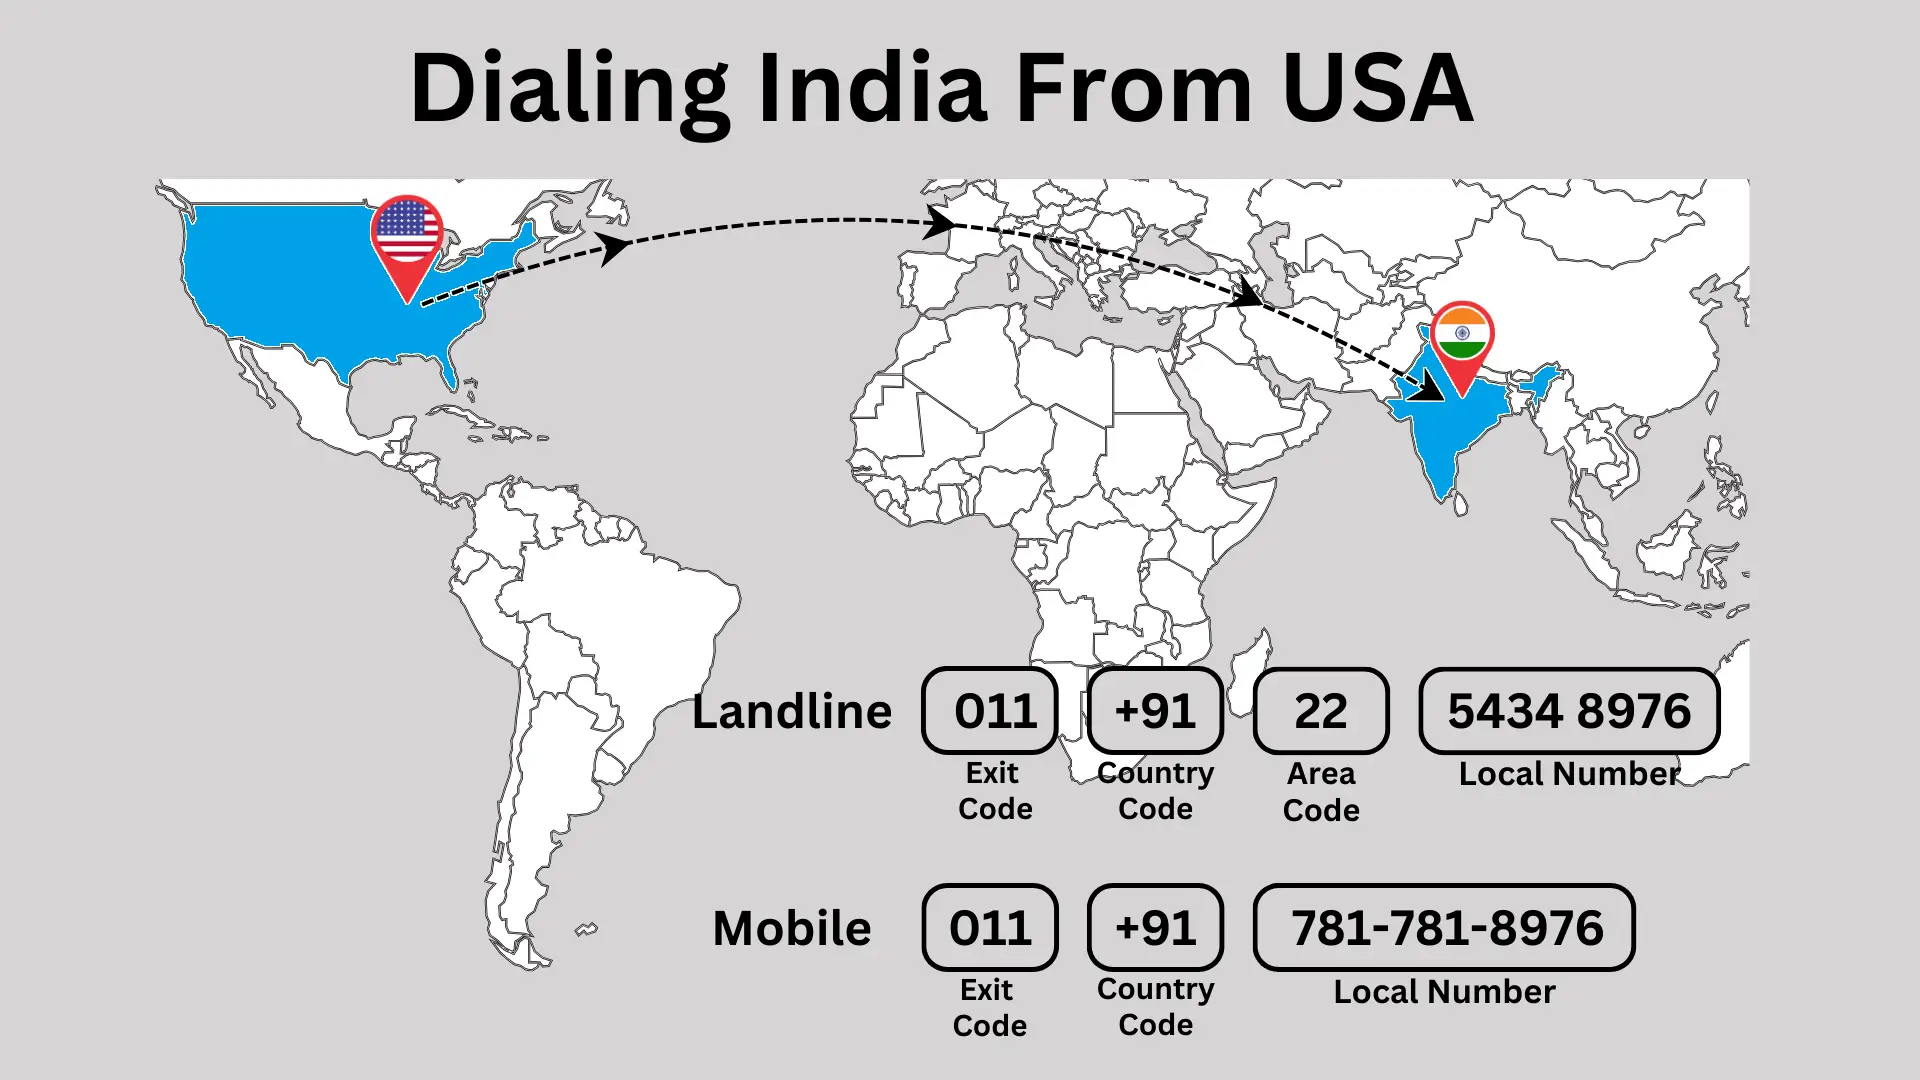 how to call India from the us